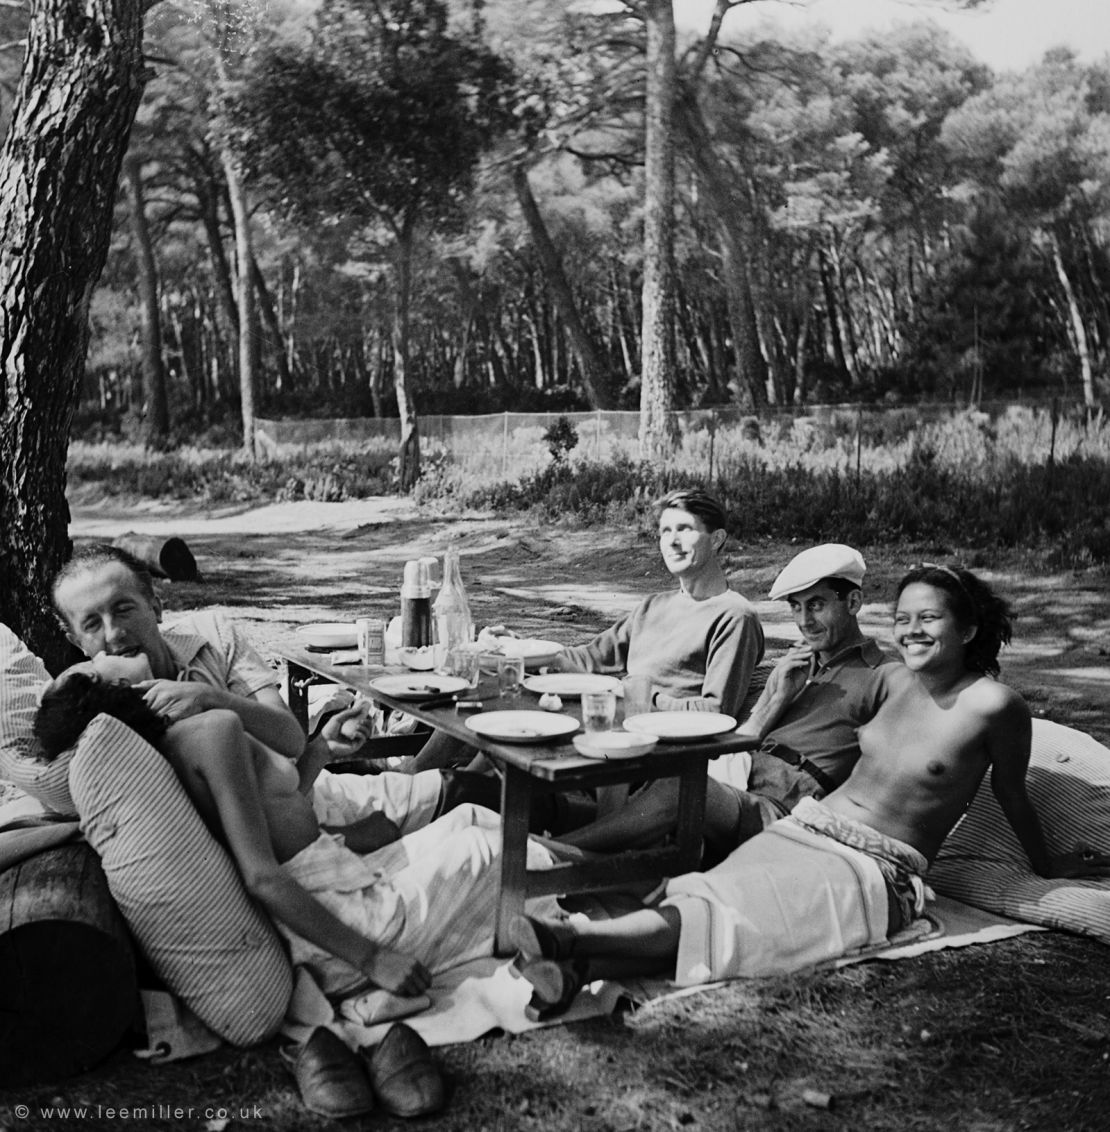 Miller’s close friendships with other artists led to her taking now-famous candid images of the era, including this photograph of the poet and artist Paul and Nusch Éluard (left); Miller's eventual husband, Roland Penrose (back right); and the artist Man Ray and model Ady Fidelin (right).